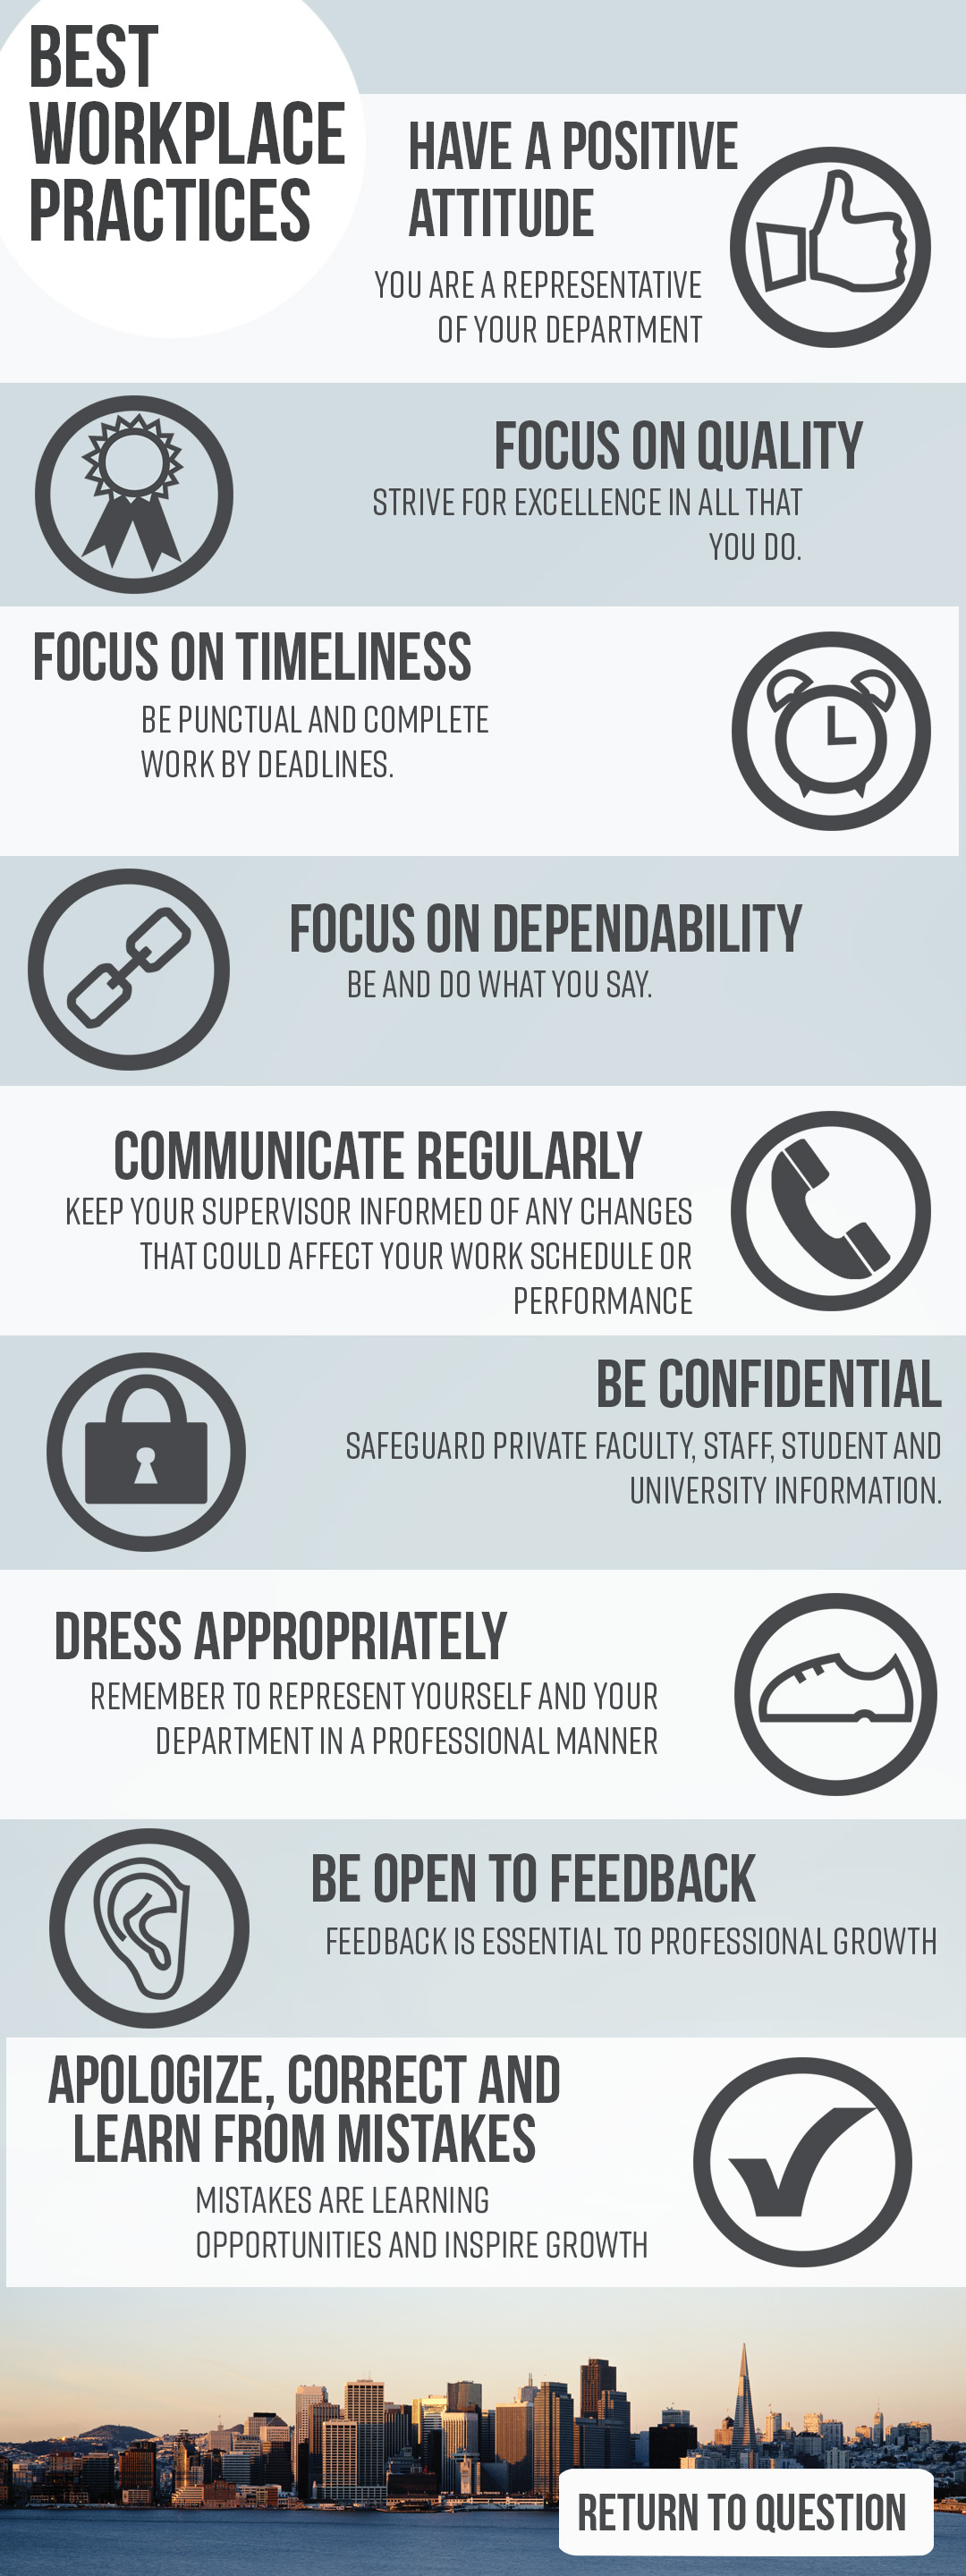 Best Workplace Practices Infographic